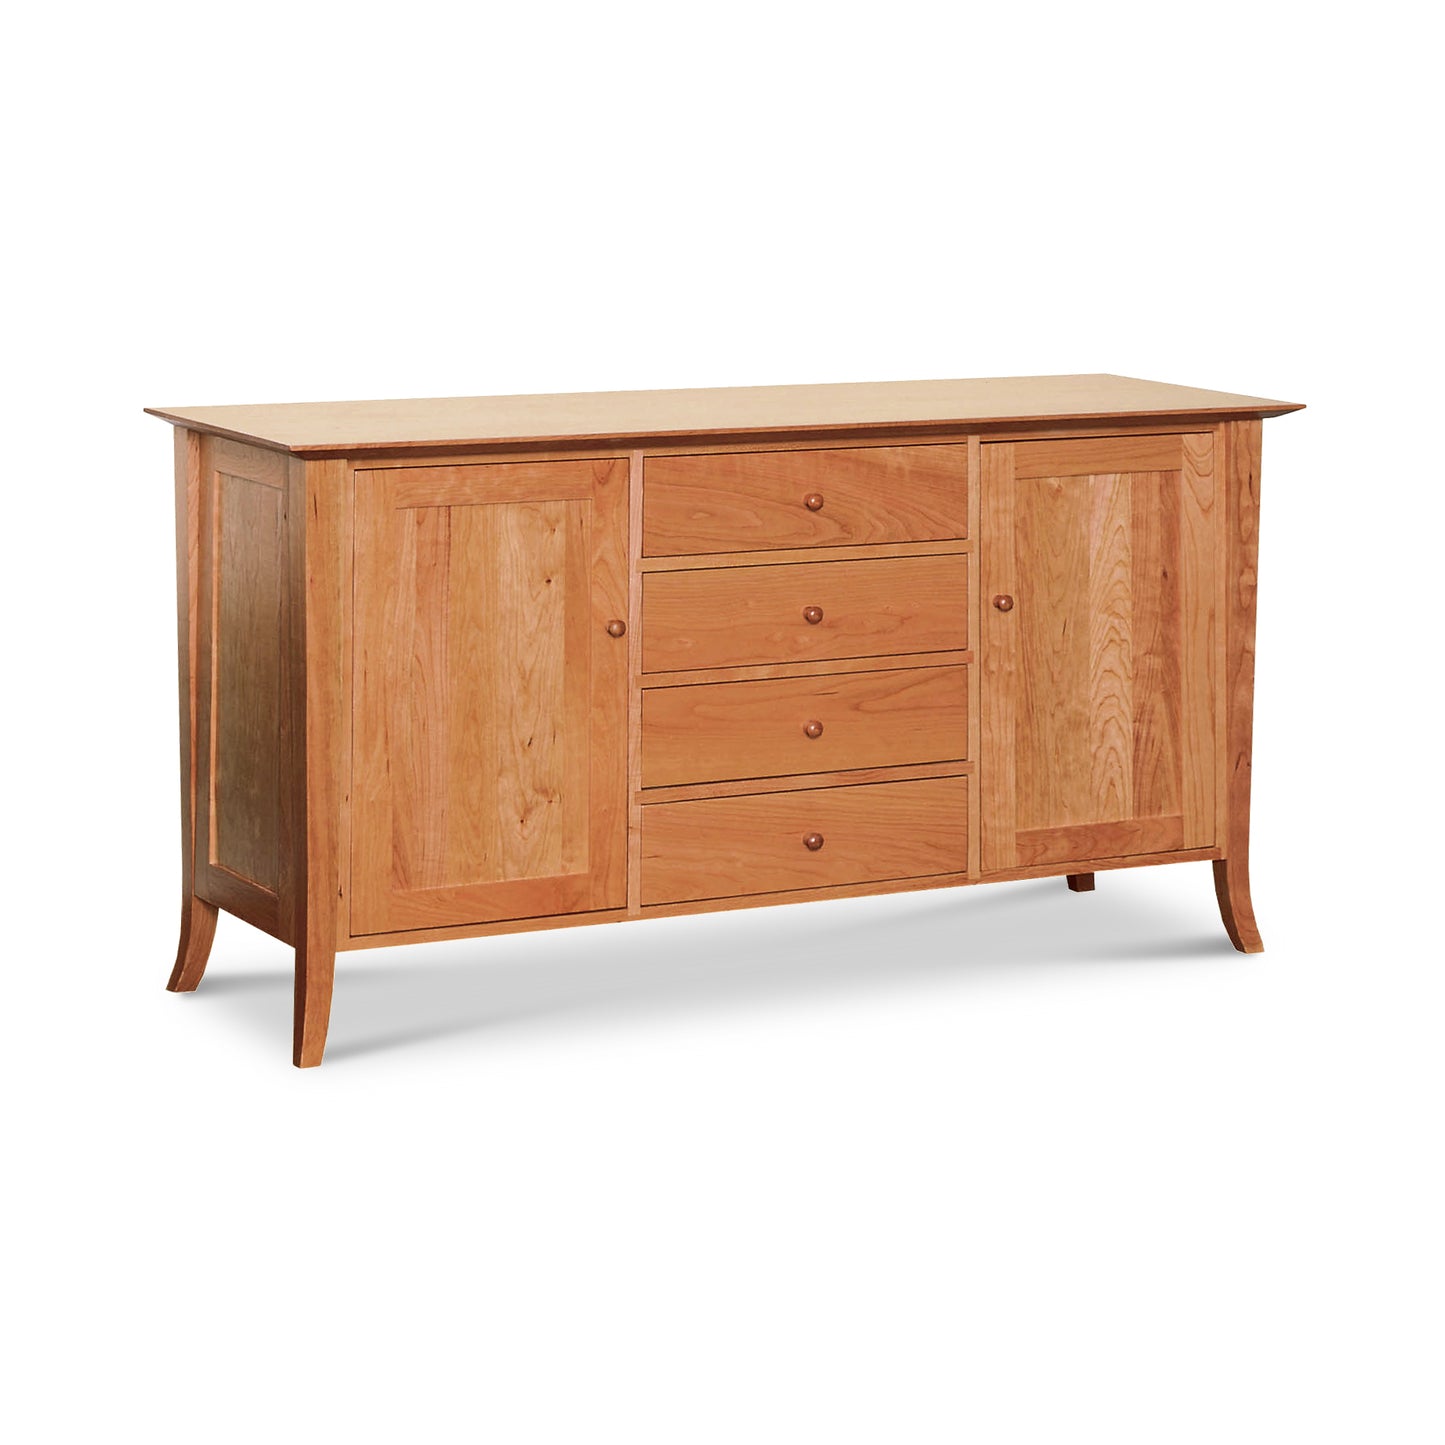 This large wooden sideboard, crafted with Lyndon Furniture's Vermont craftsmanship, features both drawers and doors. Made with natural cherry wood, this Classic Shaker Flare Leg Large Buffet from Lyndon Furniture showcases timeless appeal.